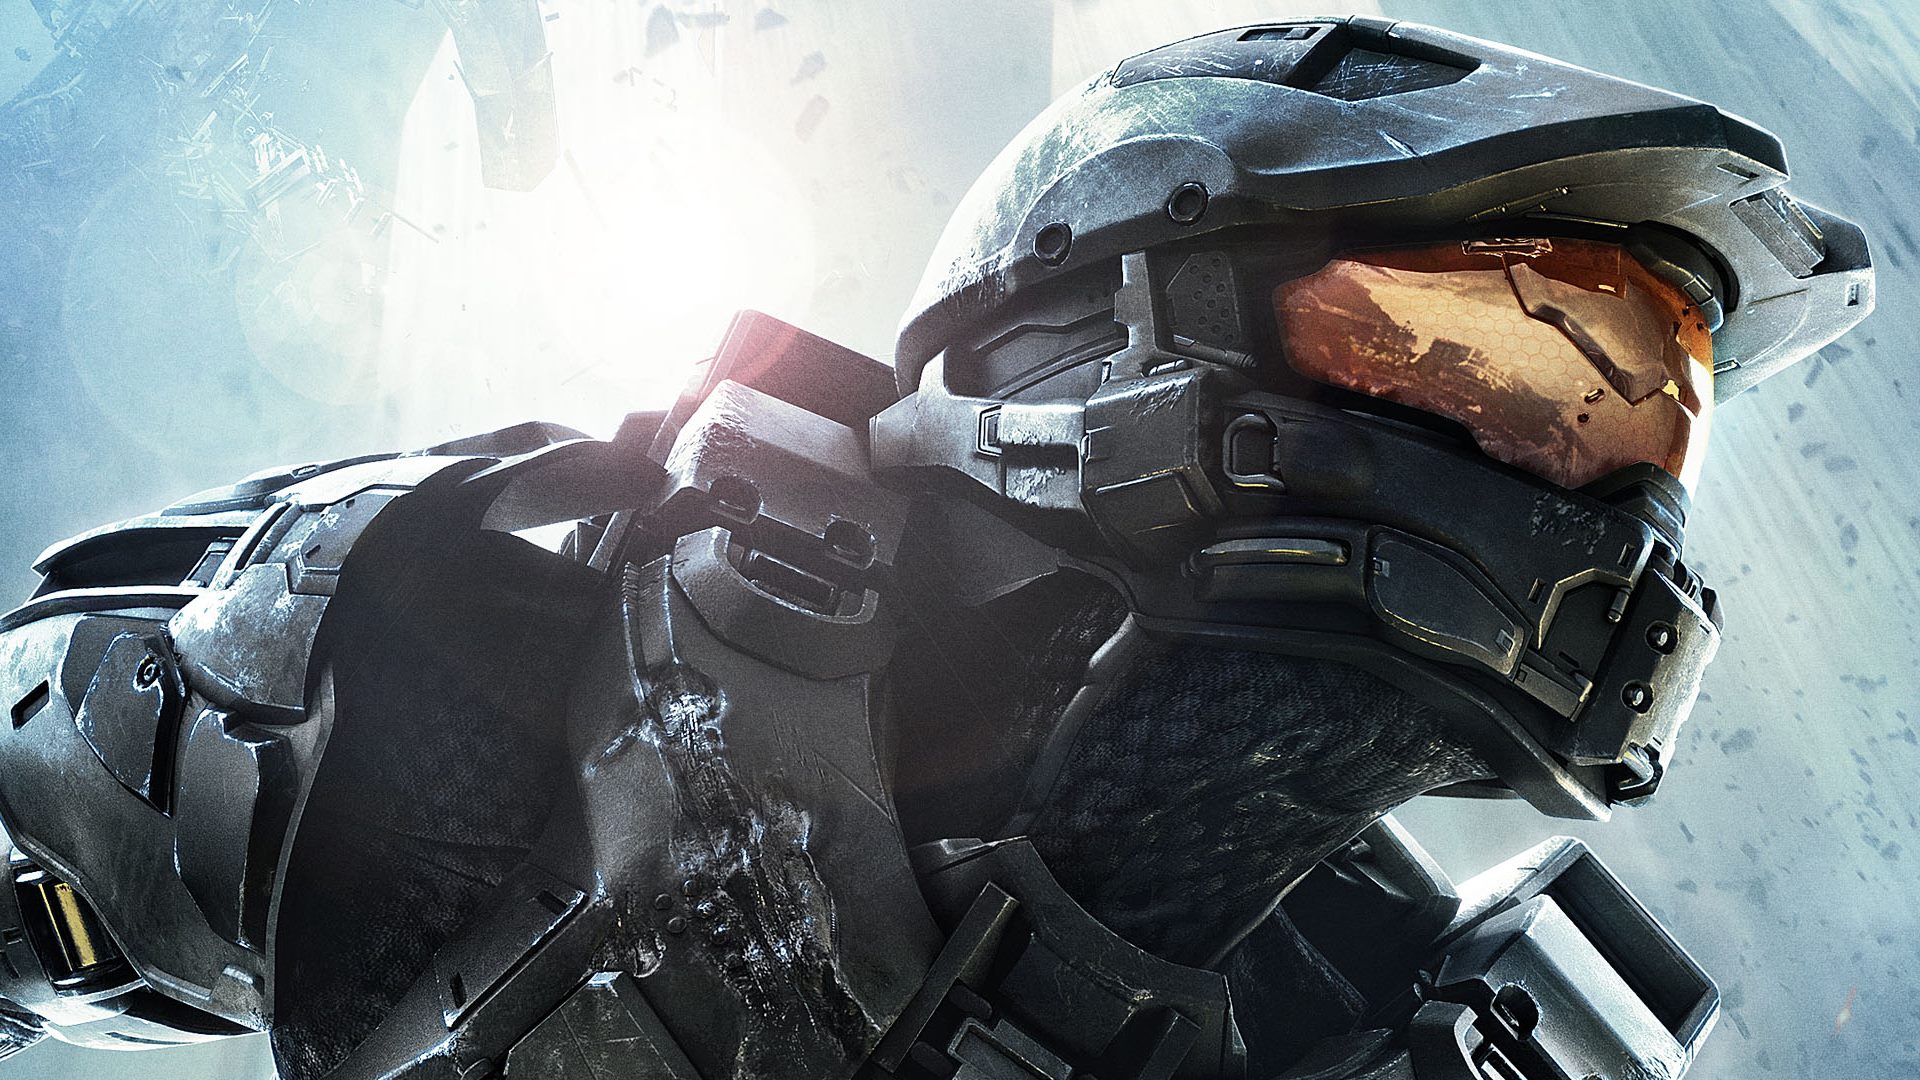 Video Game Halo 4 1920x1080